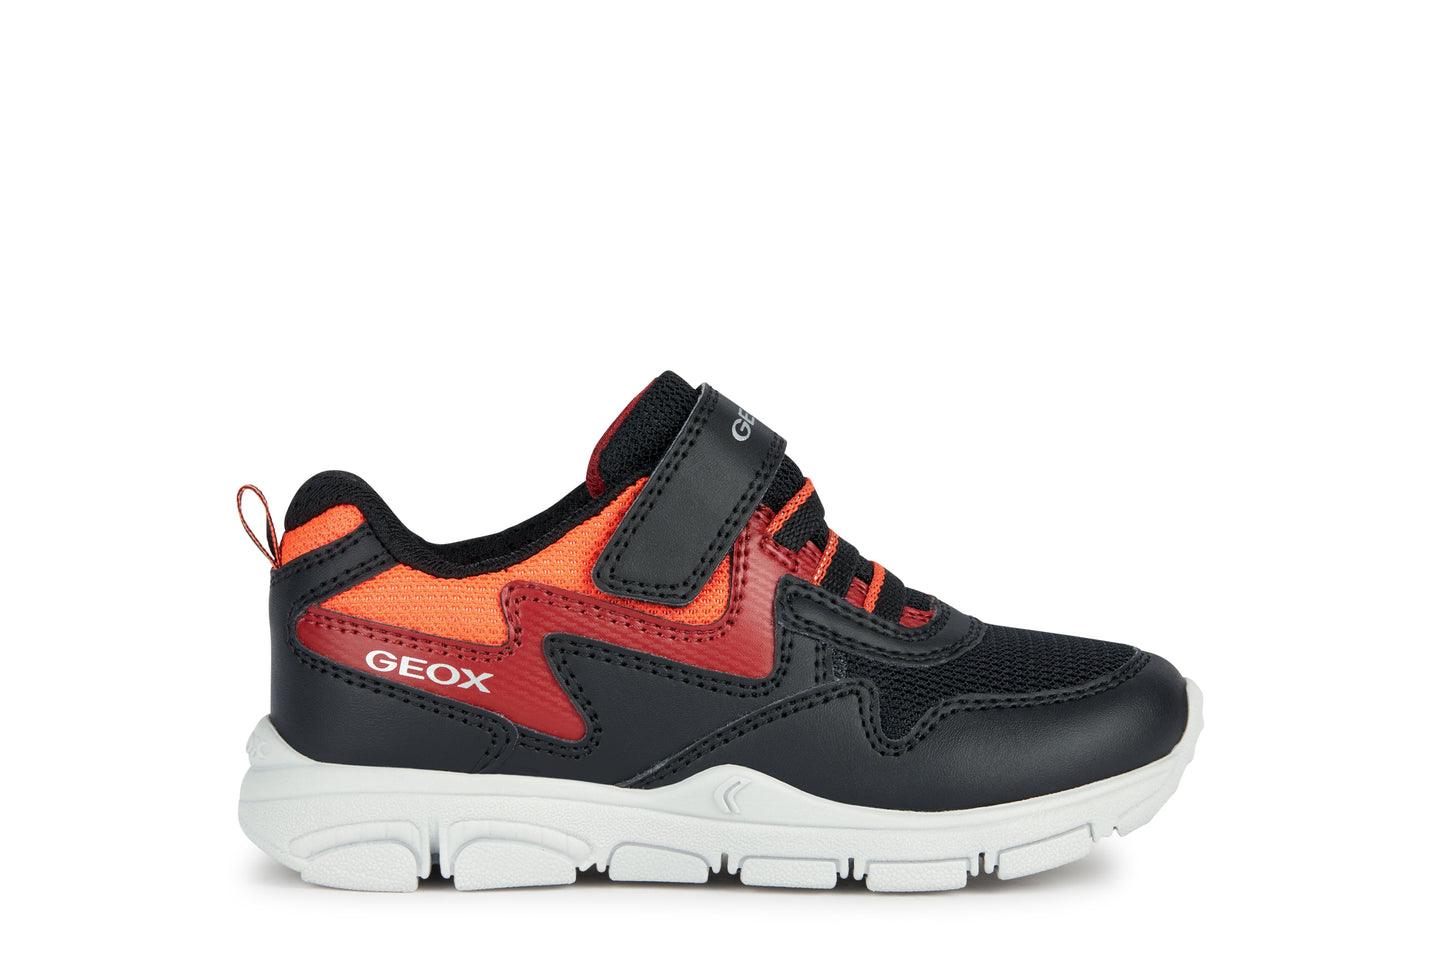 A boys trainer by Geox, style New Torque, in black, red and orange, with velcro strap and bungee laces. Right side view.